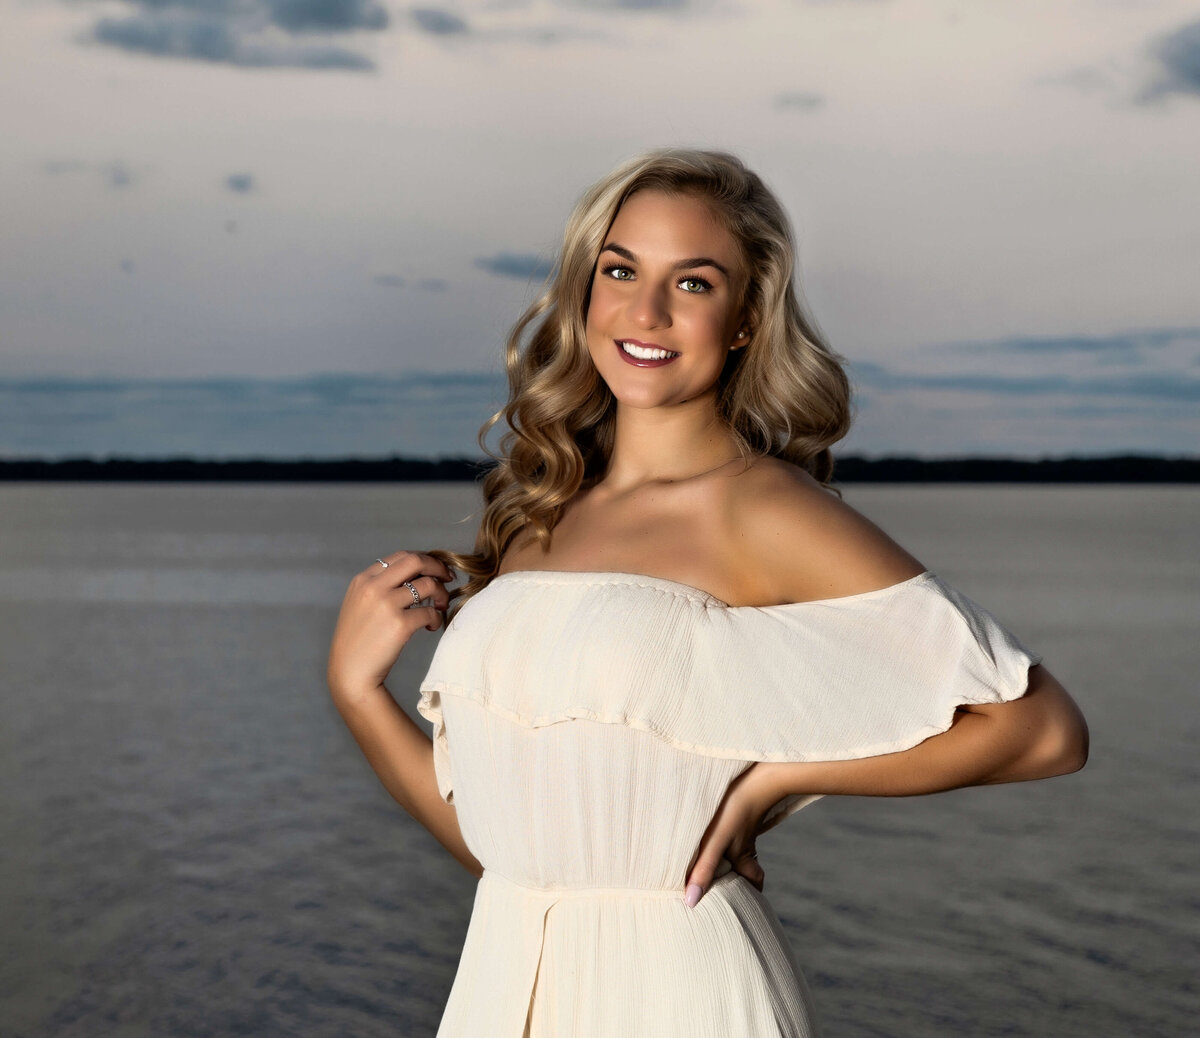 Senior photo of a girl in a white dress standing by the water on the Erie Pa bayfront